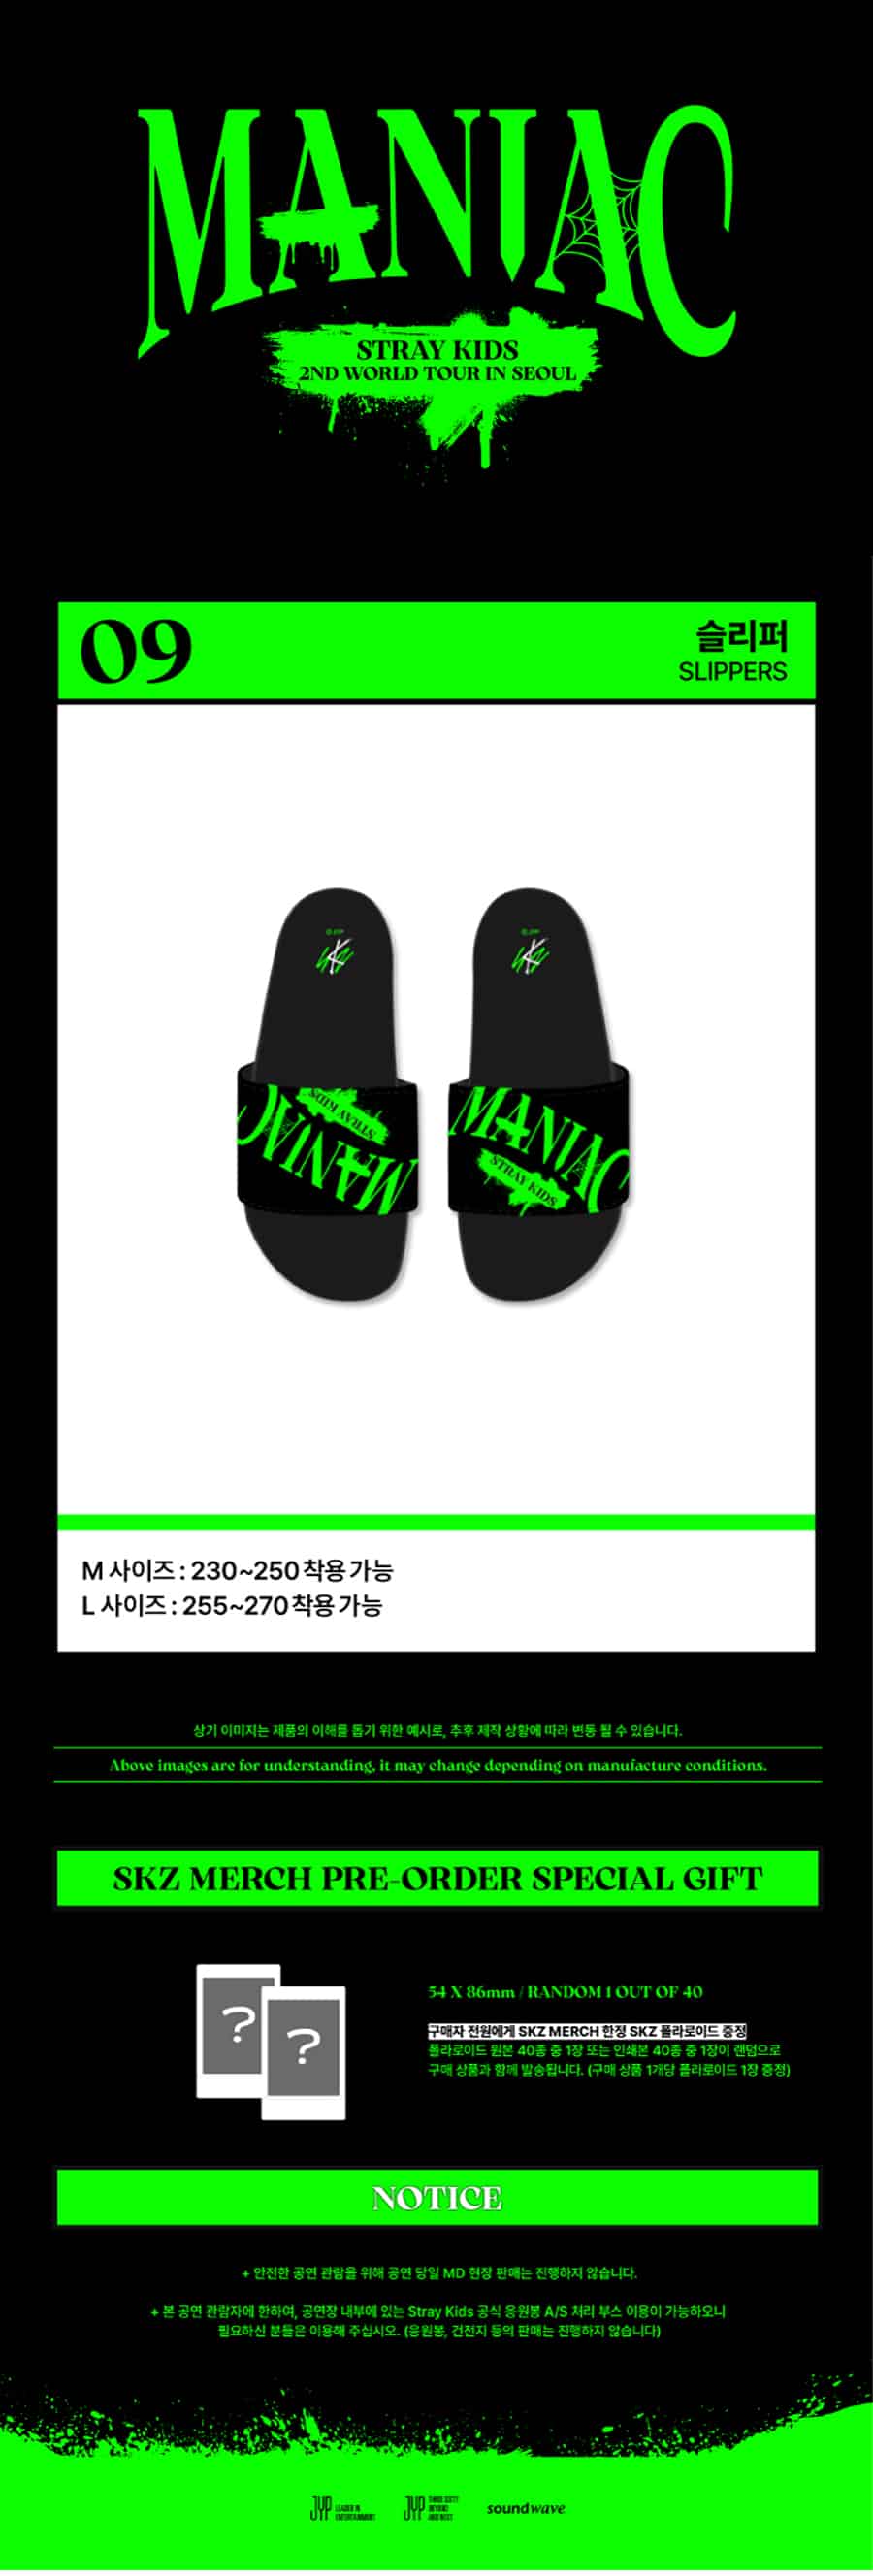 stray-kids-2nd-world-tour-maniac-in-seoul-slippers-1